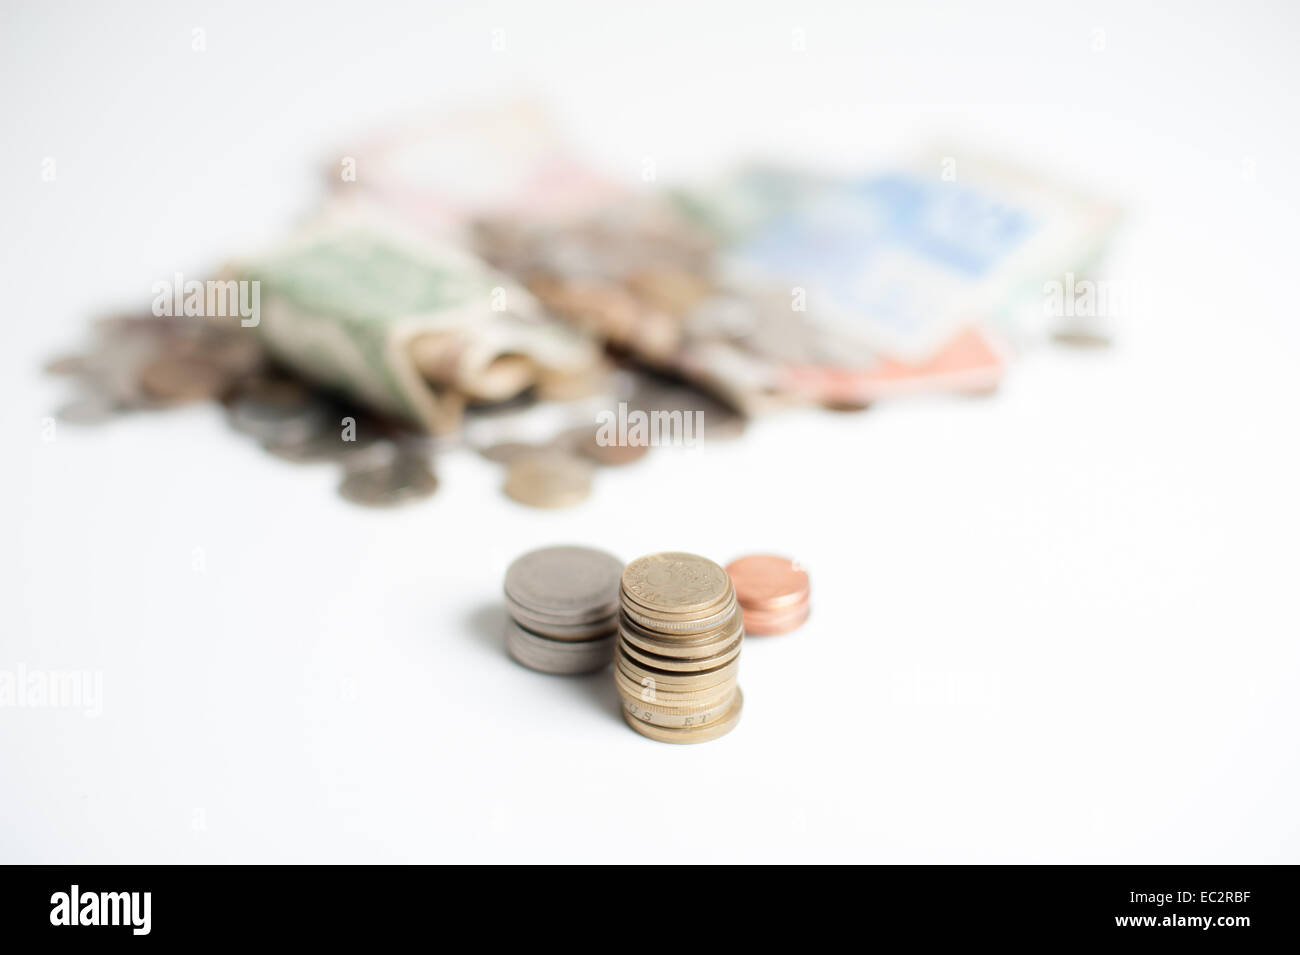 Three piles of coins, gold, silver, and bronze, with mountain of money coins and banknotes out of focus in background Stock Photo